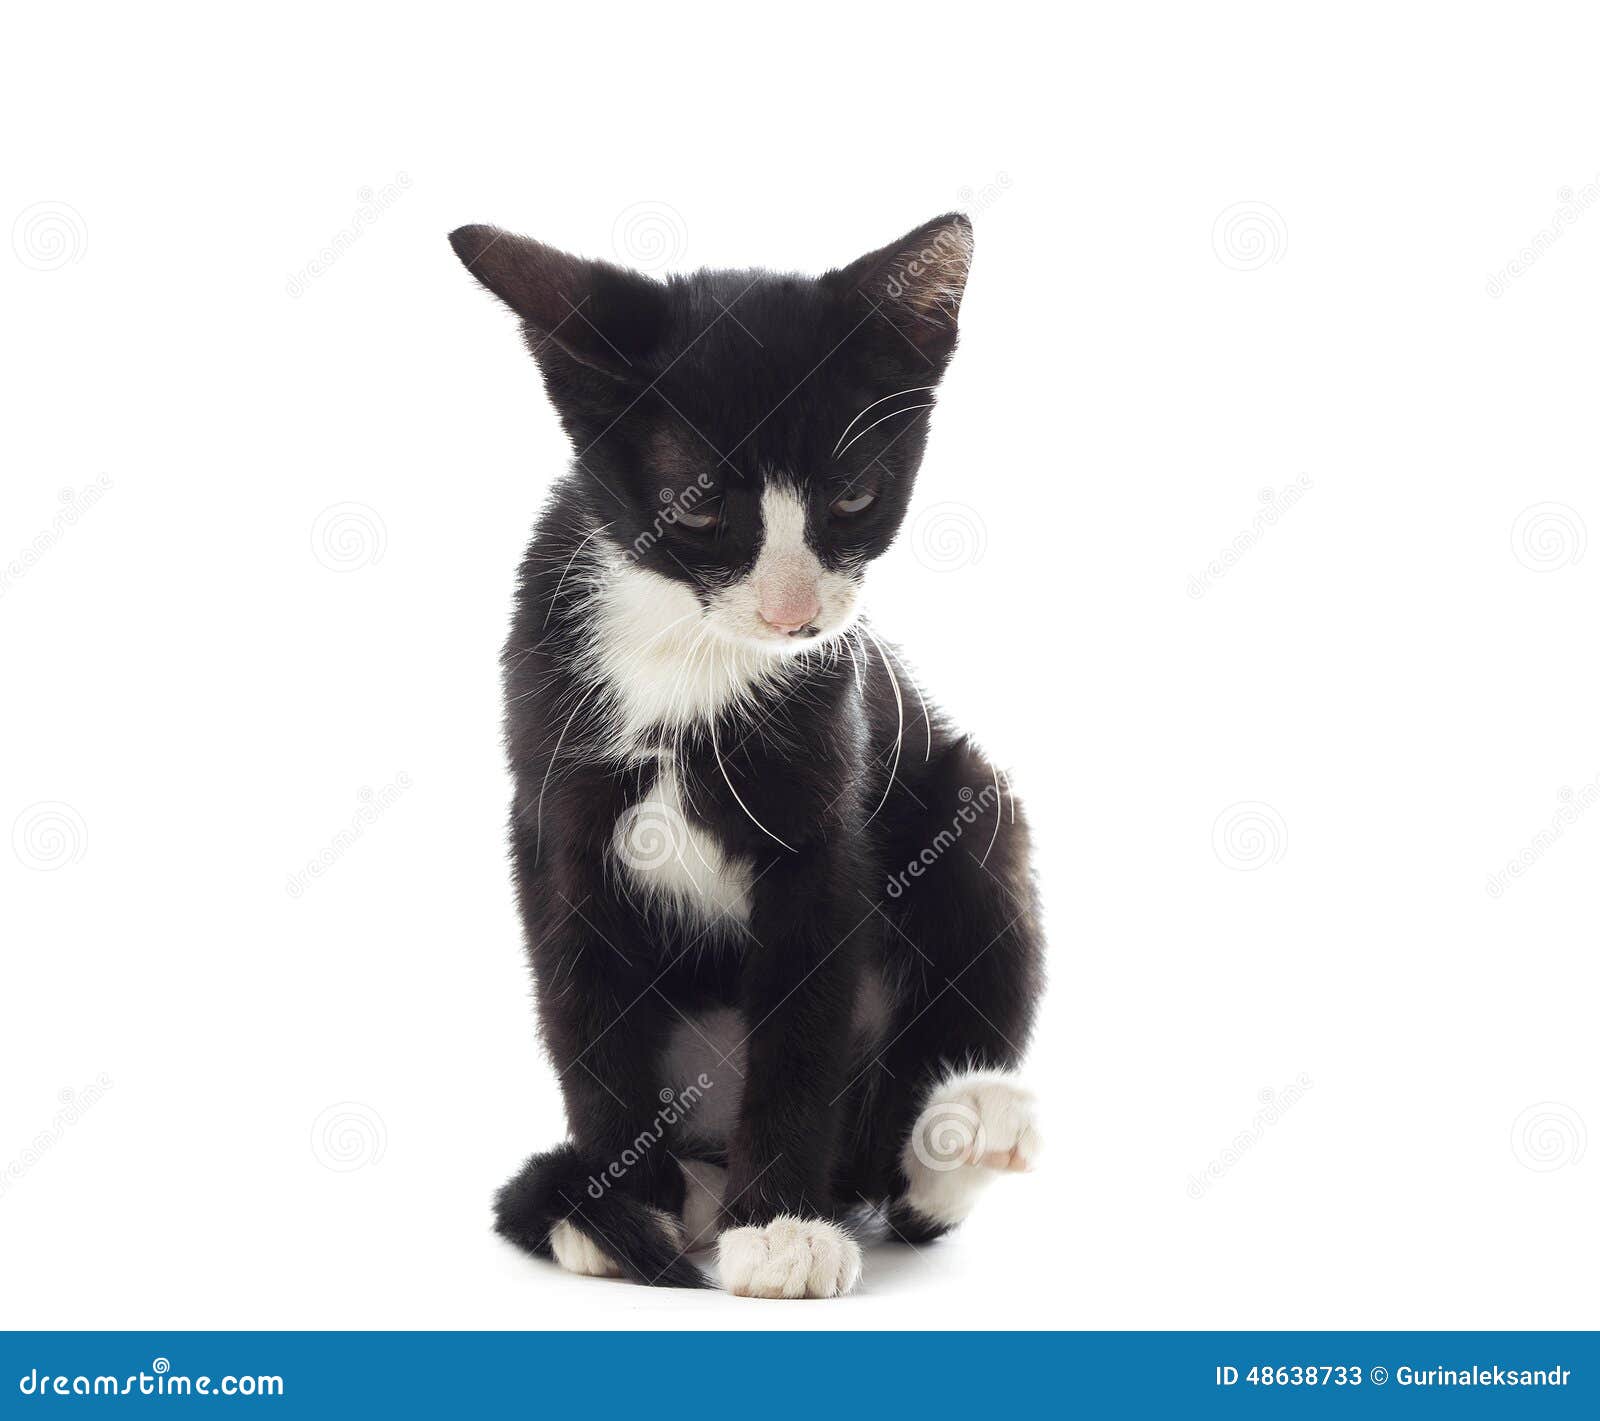 Funny black and white cat stock image. Image of pets - 48638733